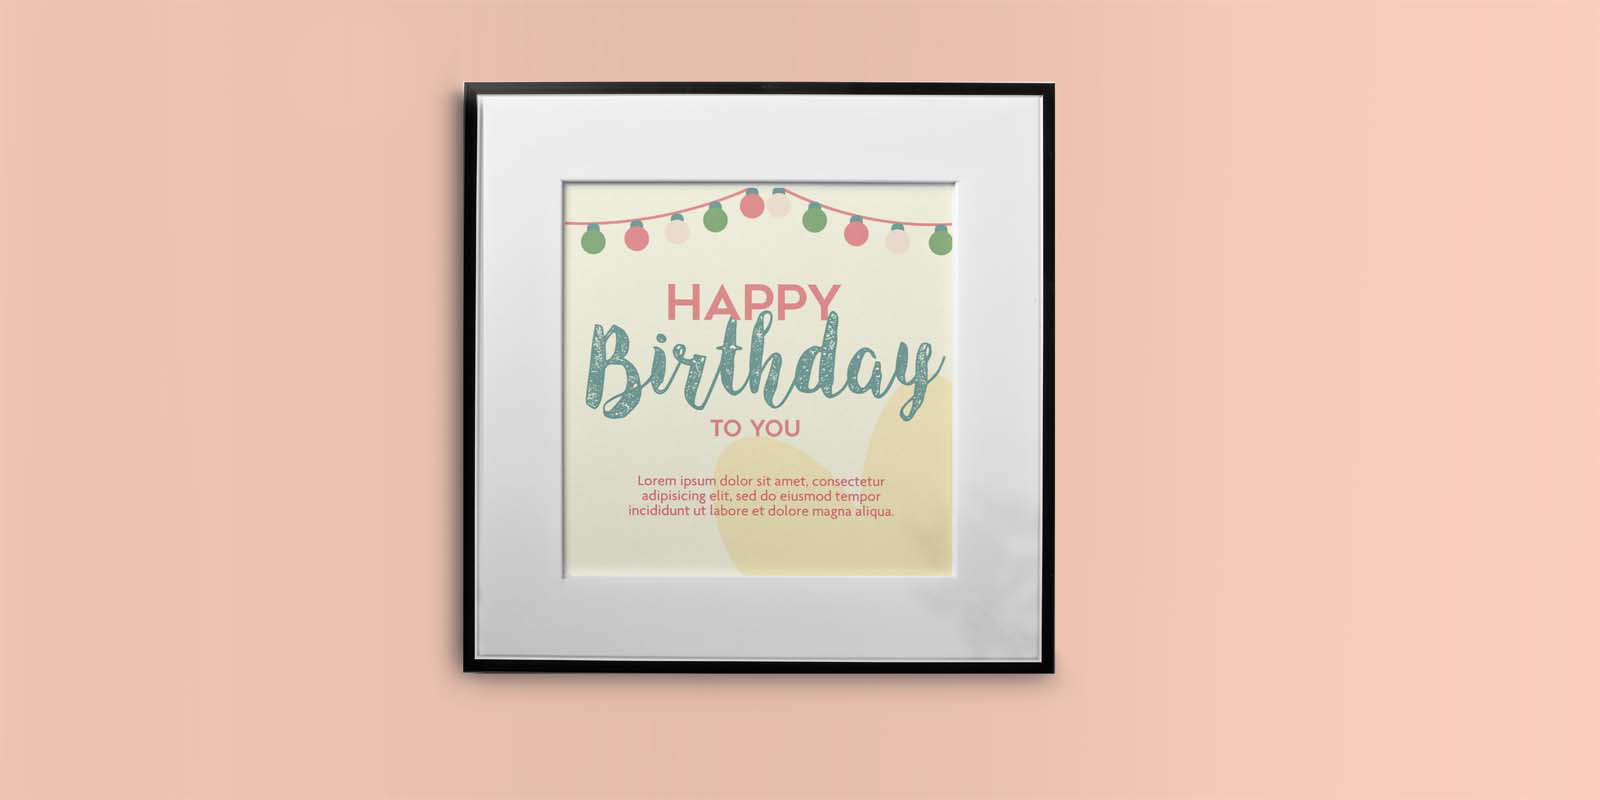 Birthday prints in Paris - Print with Pagerr